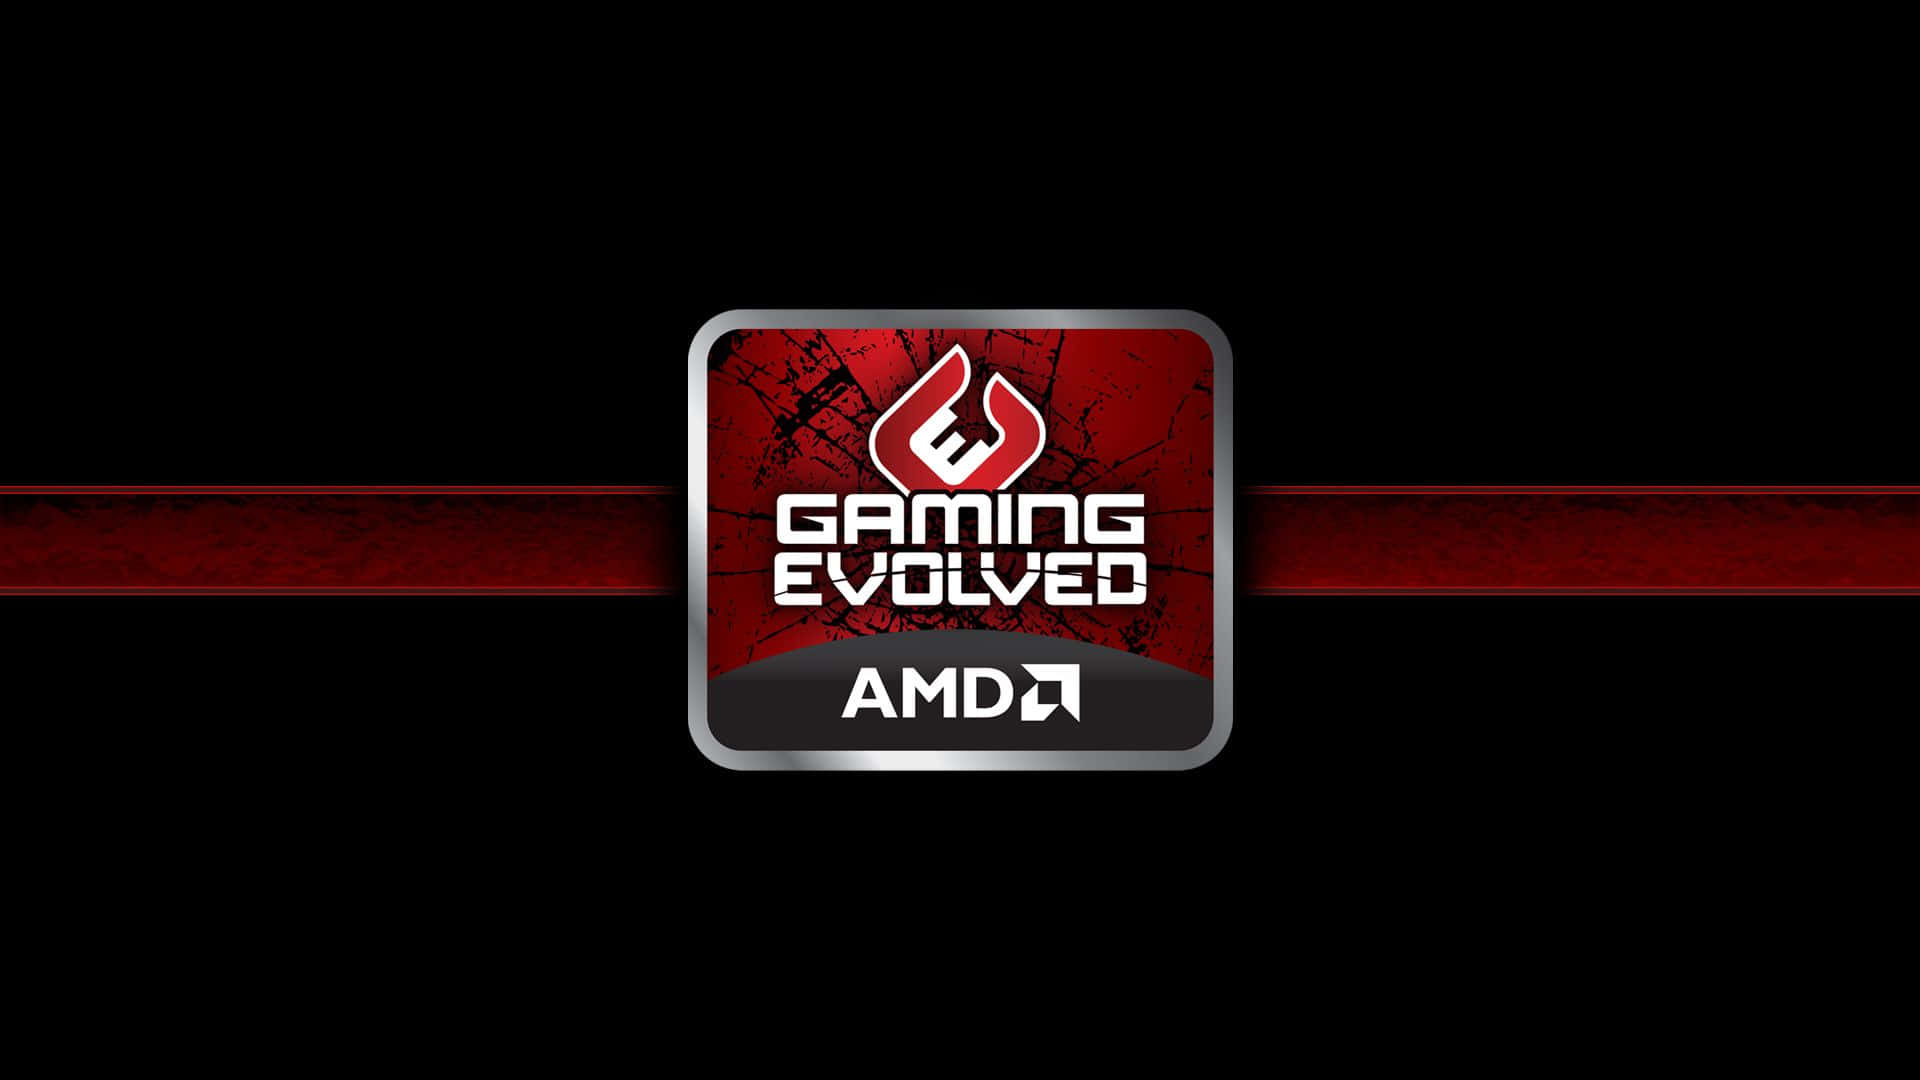 Experience the power of AMD processor